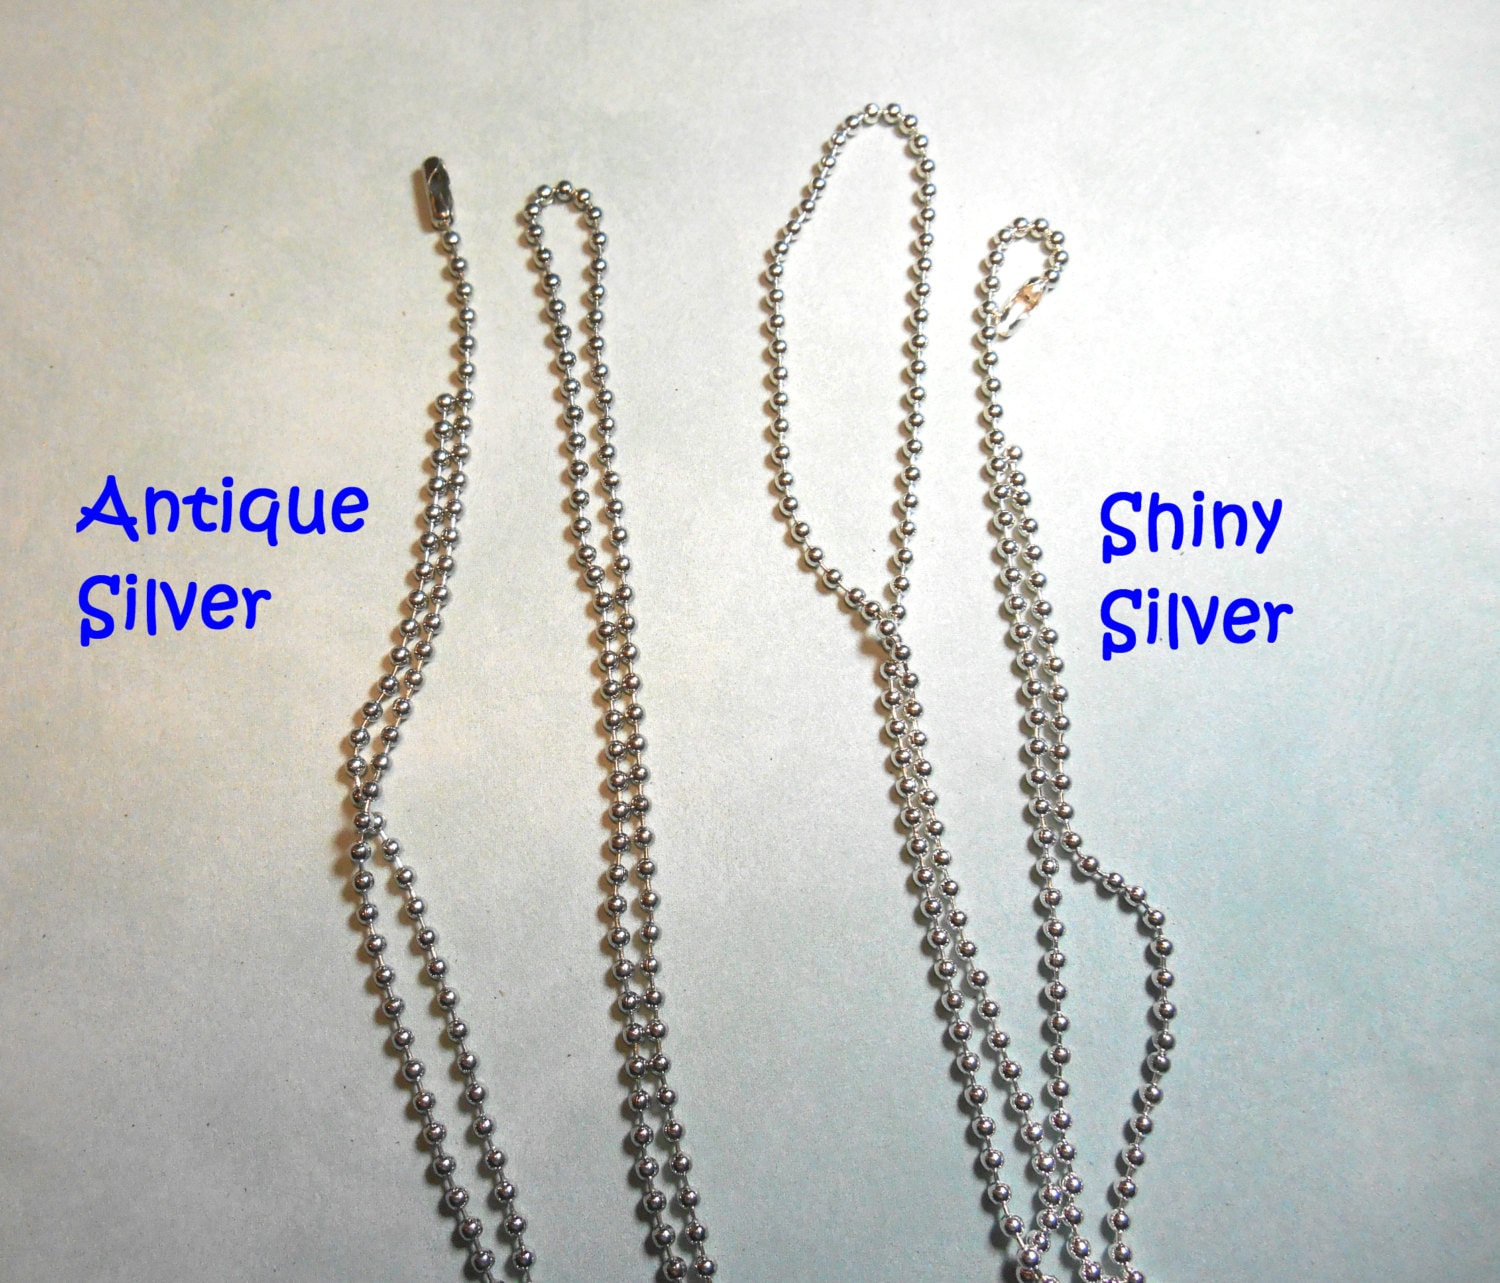 Antique Silver Ball Chain Necklaces - 24 inch - 2.4mm Diameter - Set of 10